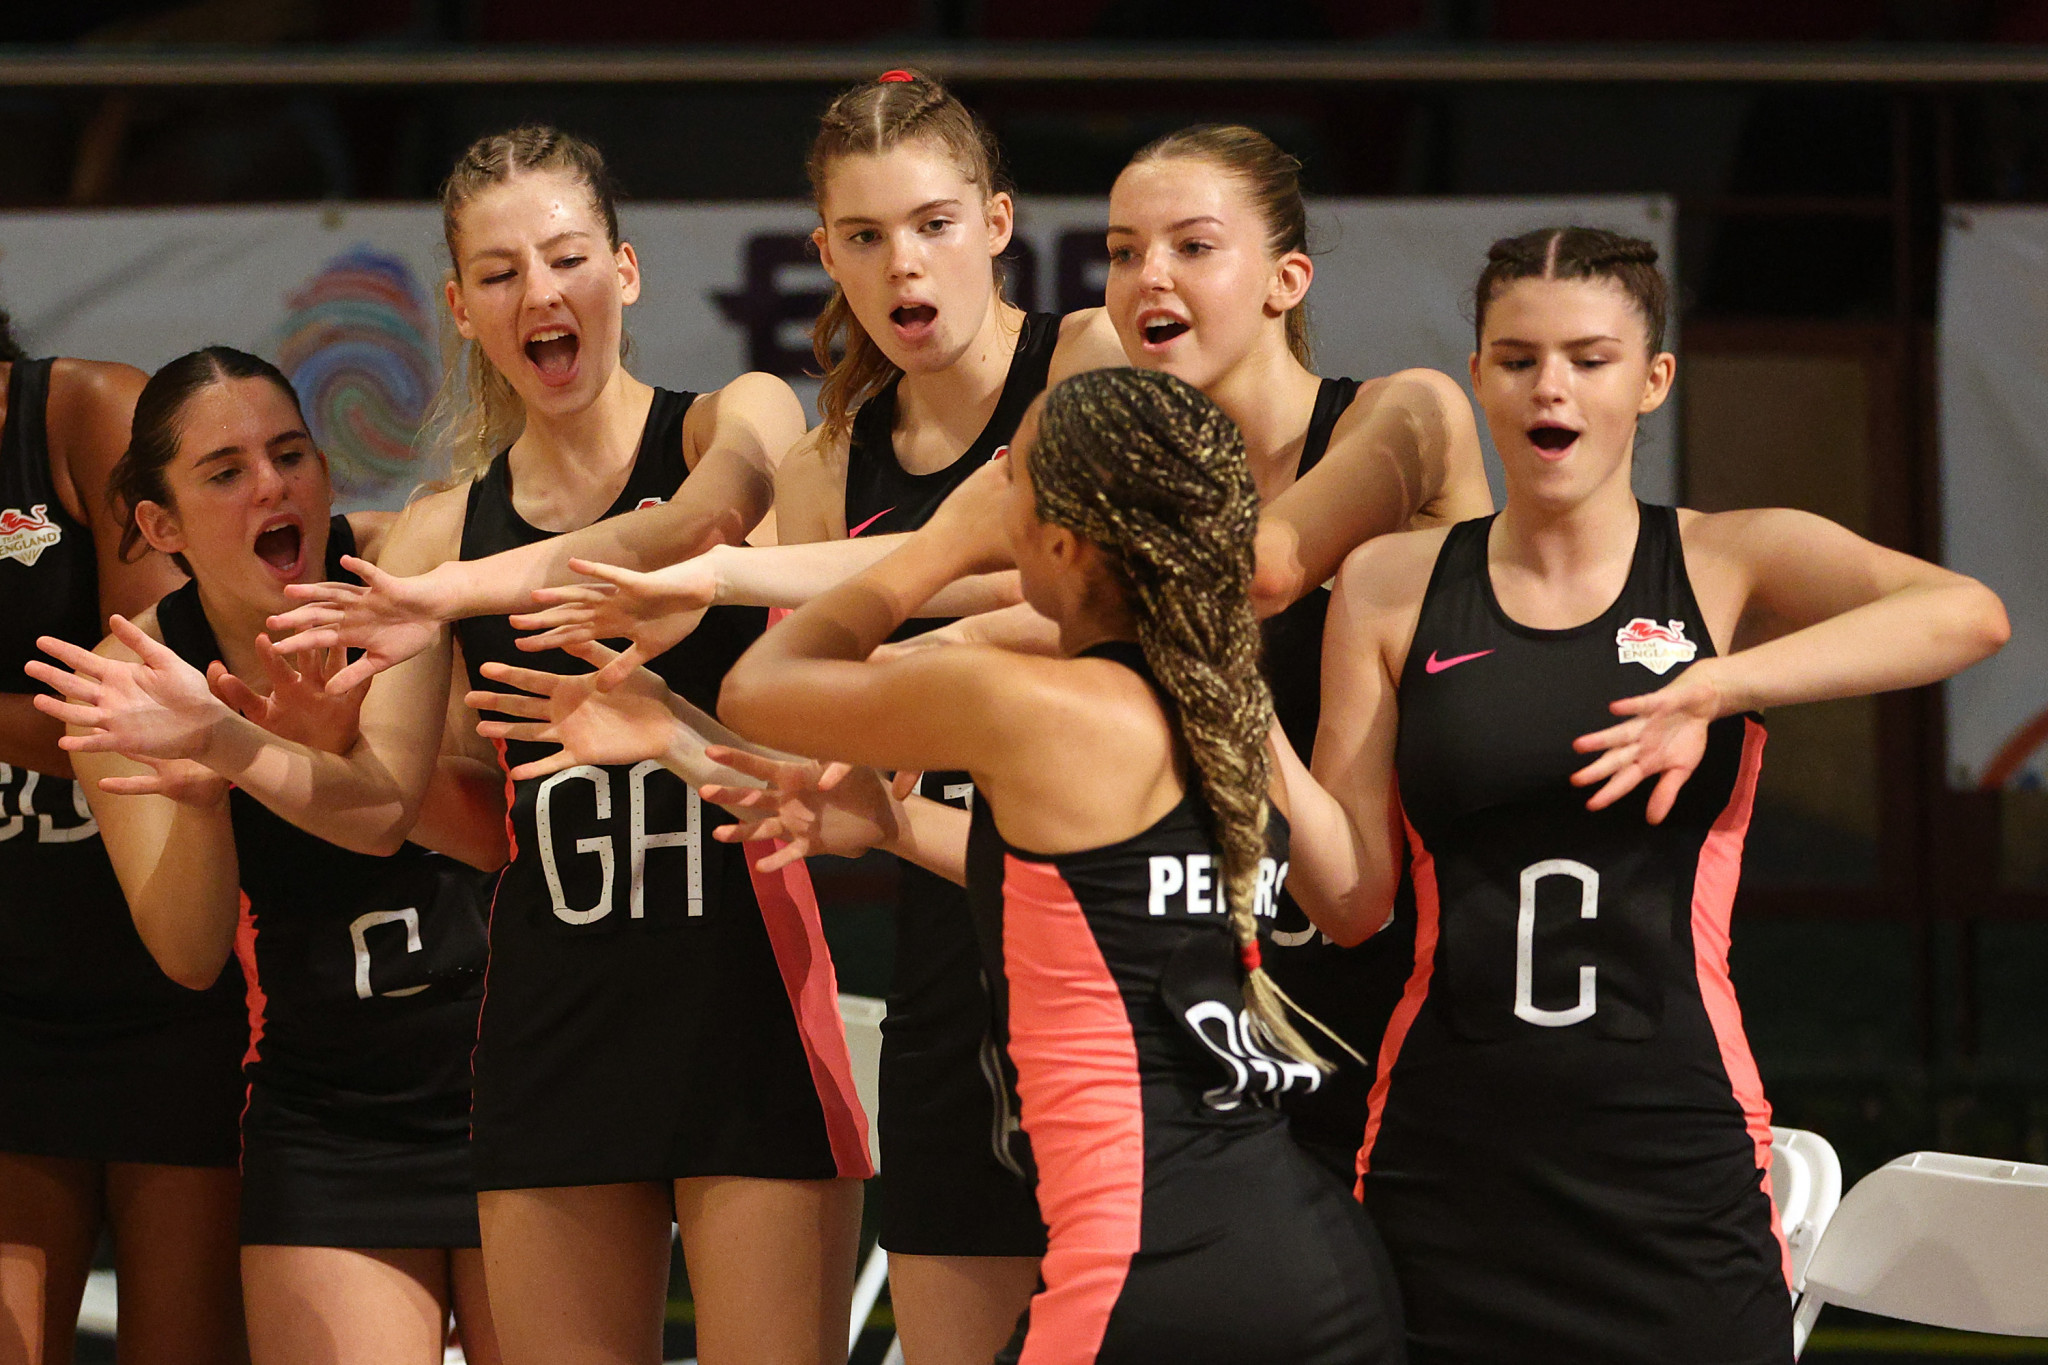 England recovered from losing their fast5 netball opener to South Africa by beating St Vincent and the Grenadines 42-14 ©Getty Images